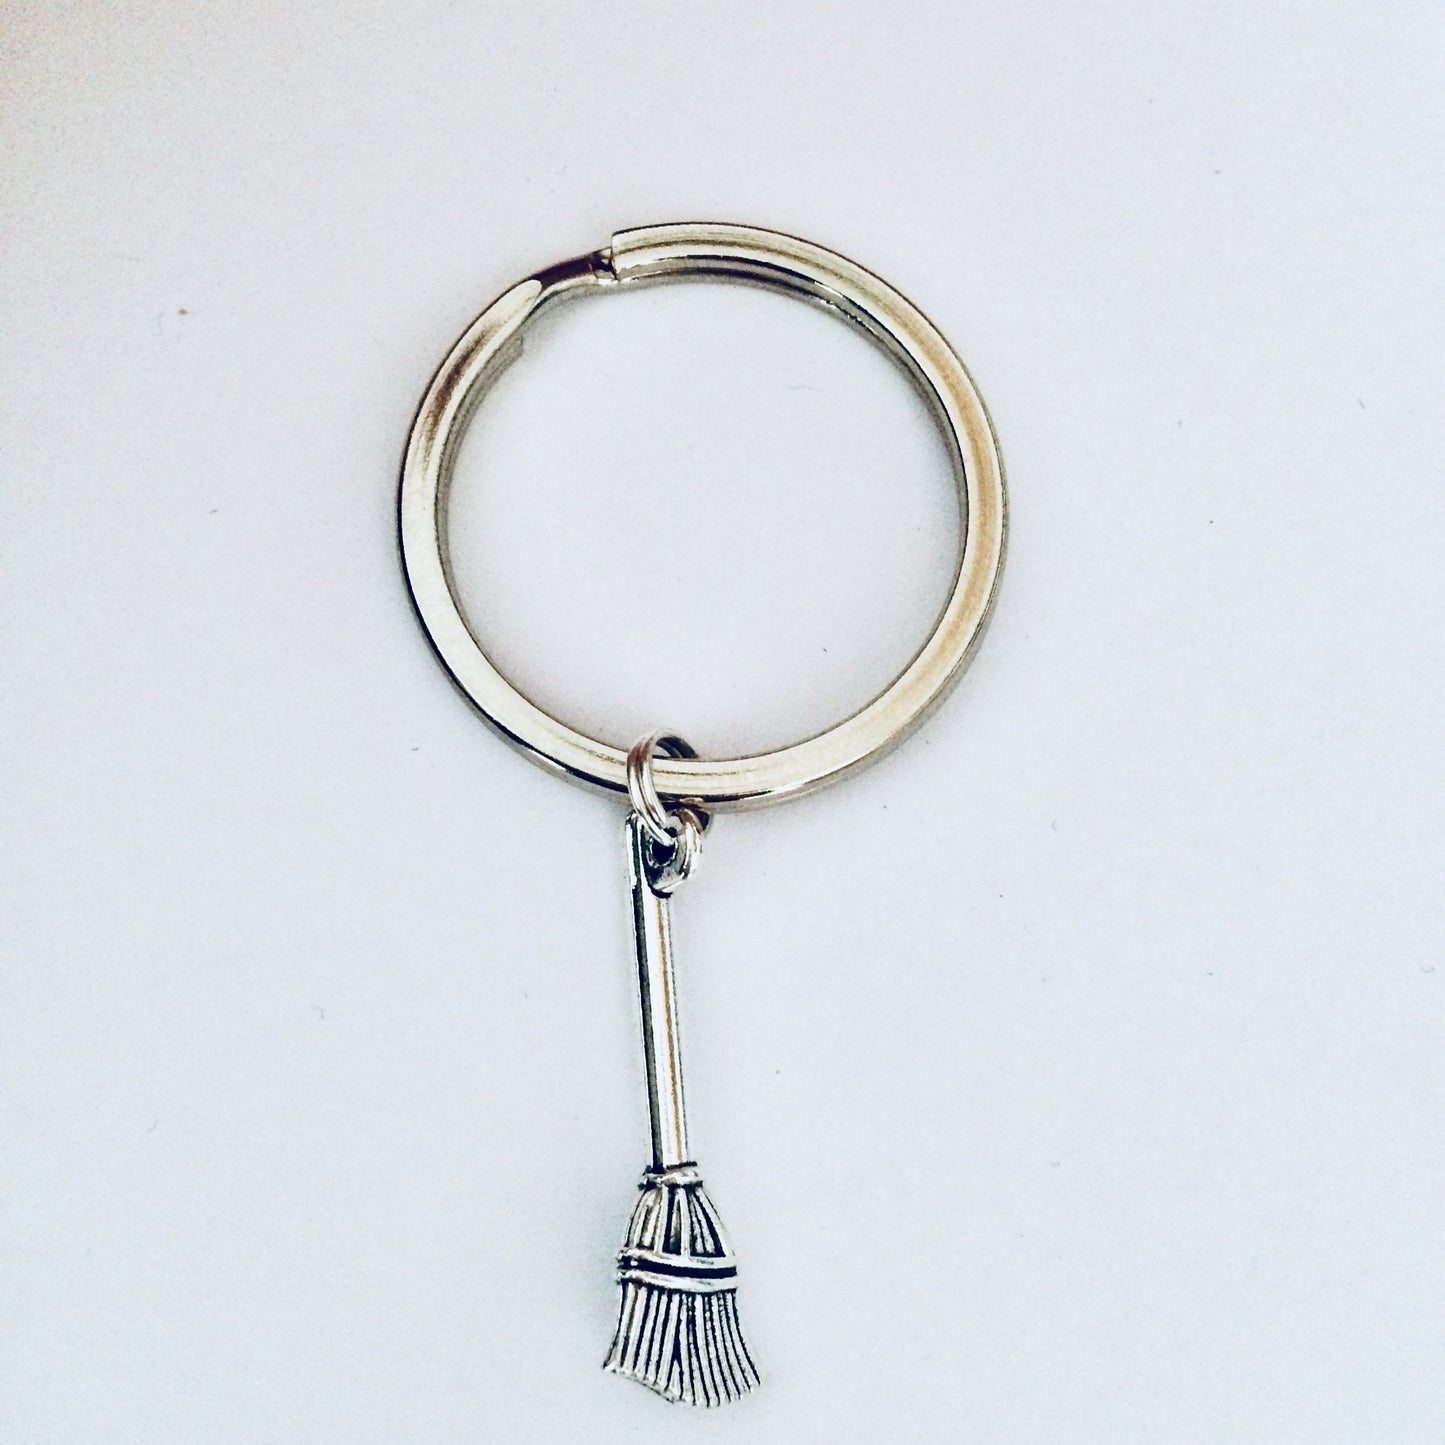 Broomstick Keychain, Witch Related Gifts, Broomstick Keyring, Pagan Gift, Witchy Gift, Witchcraft Keychain, Witch Accessories, Halloween.